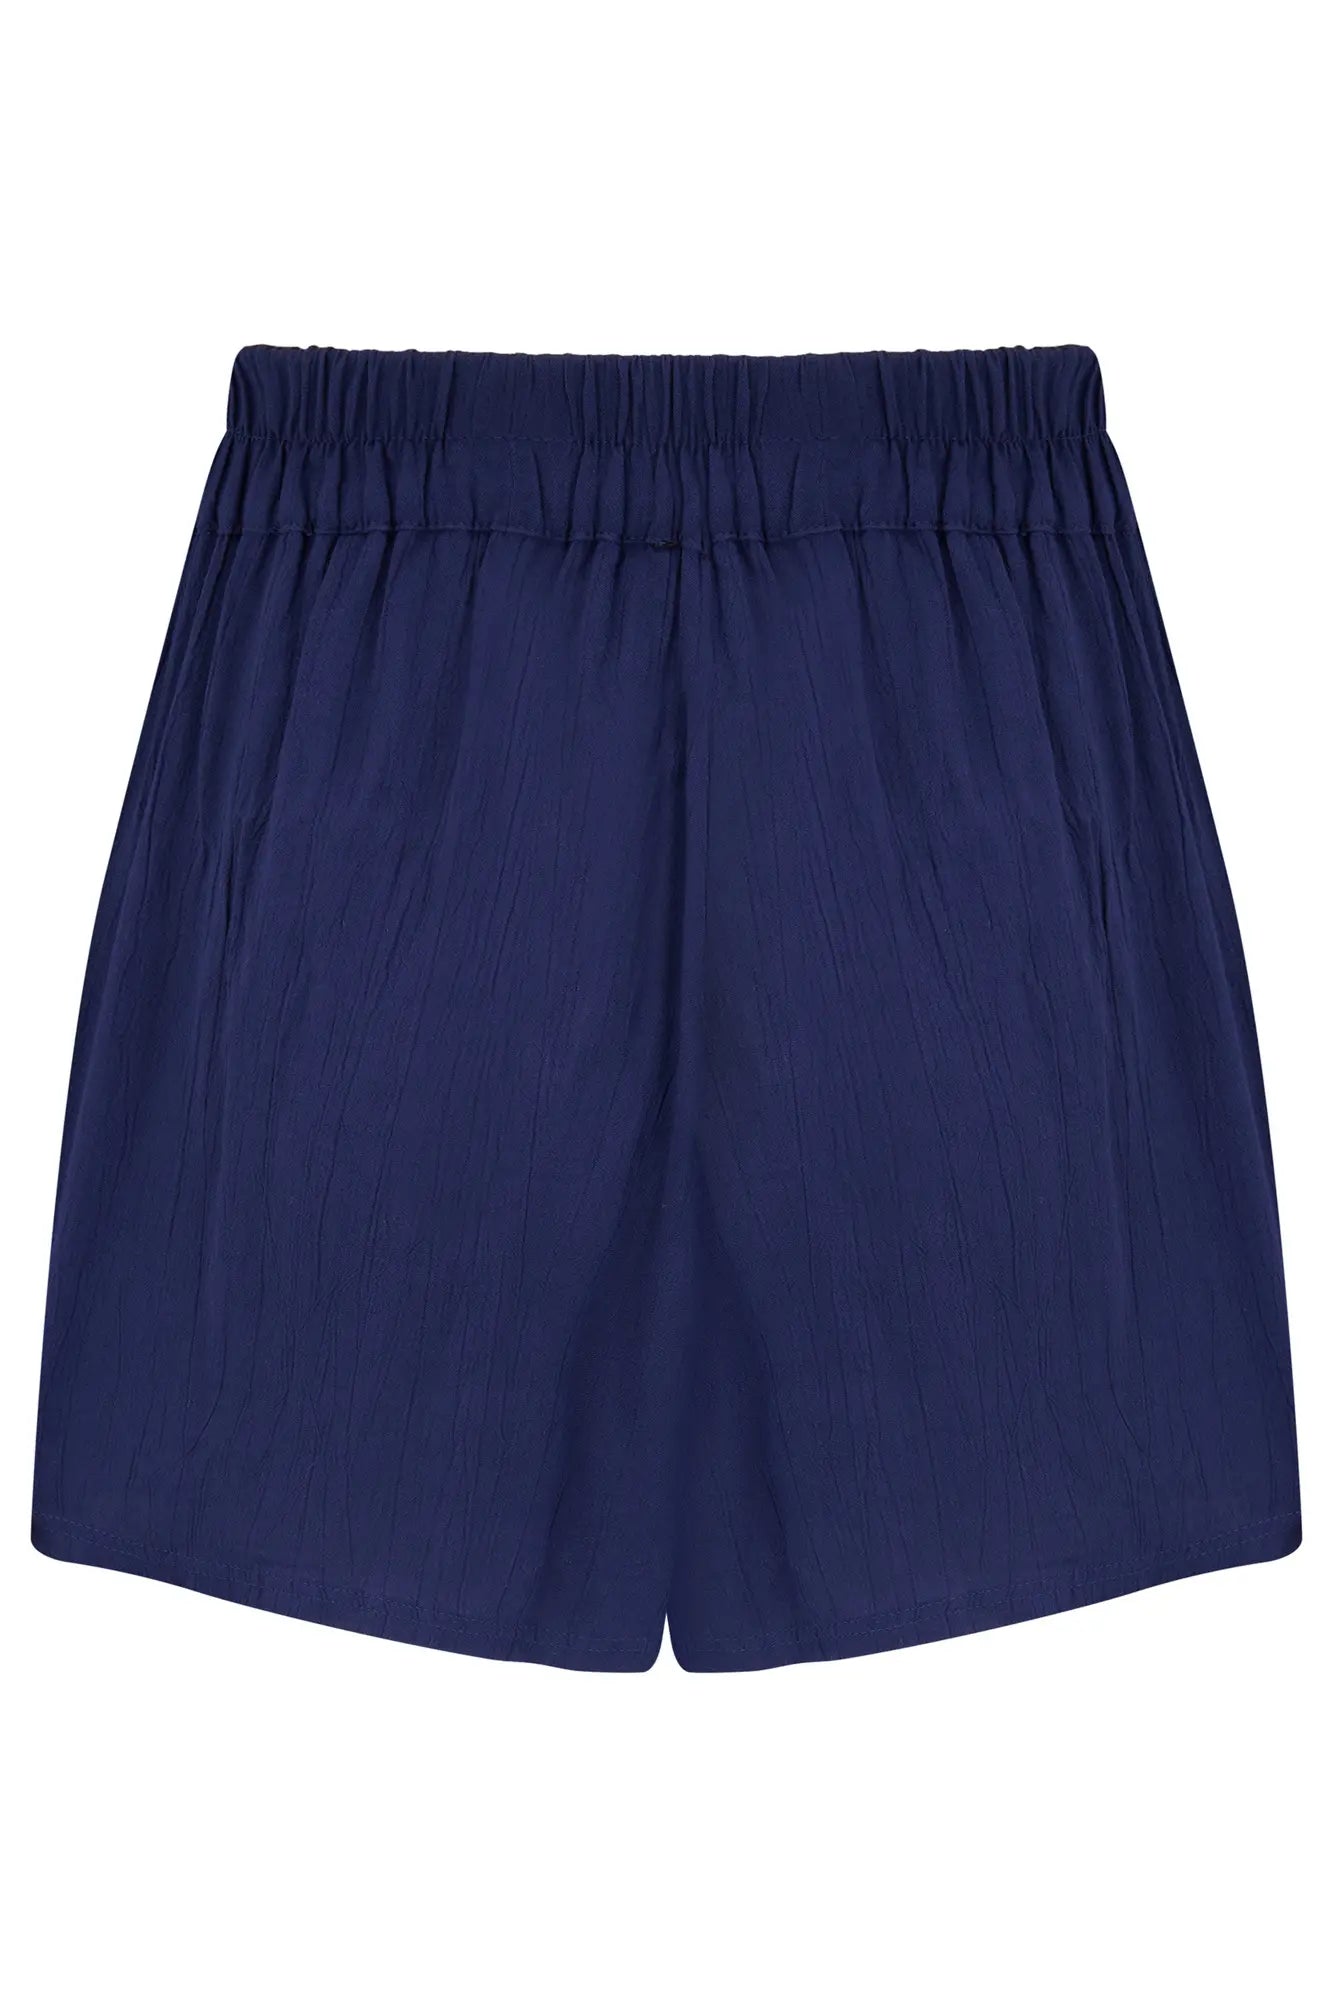 Crinkle Viscose Gold Trim Beach Shorts In Navy - Pour Moi